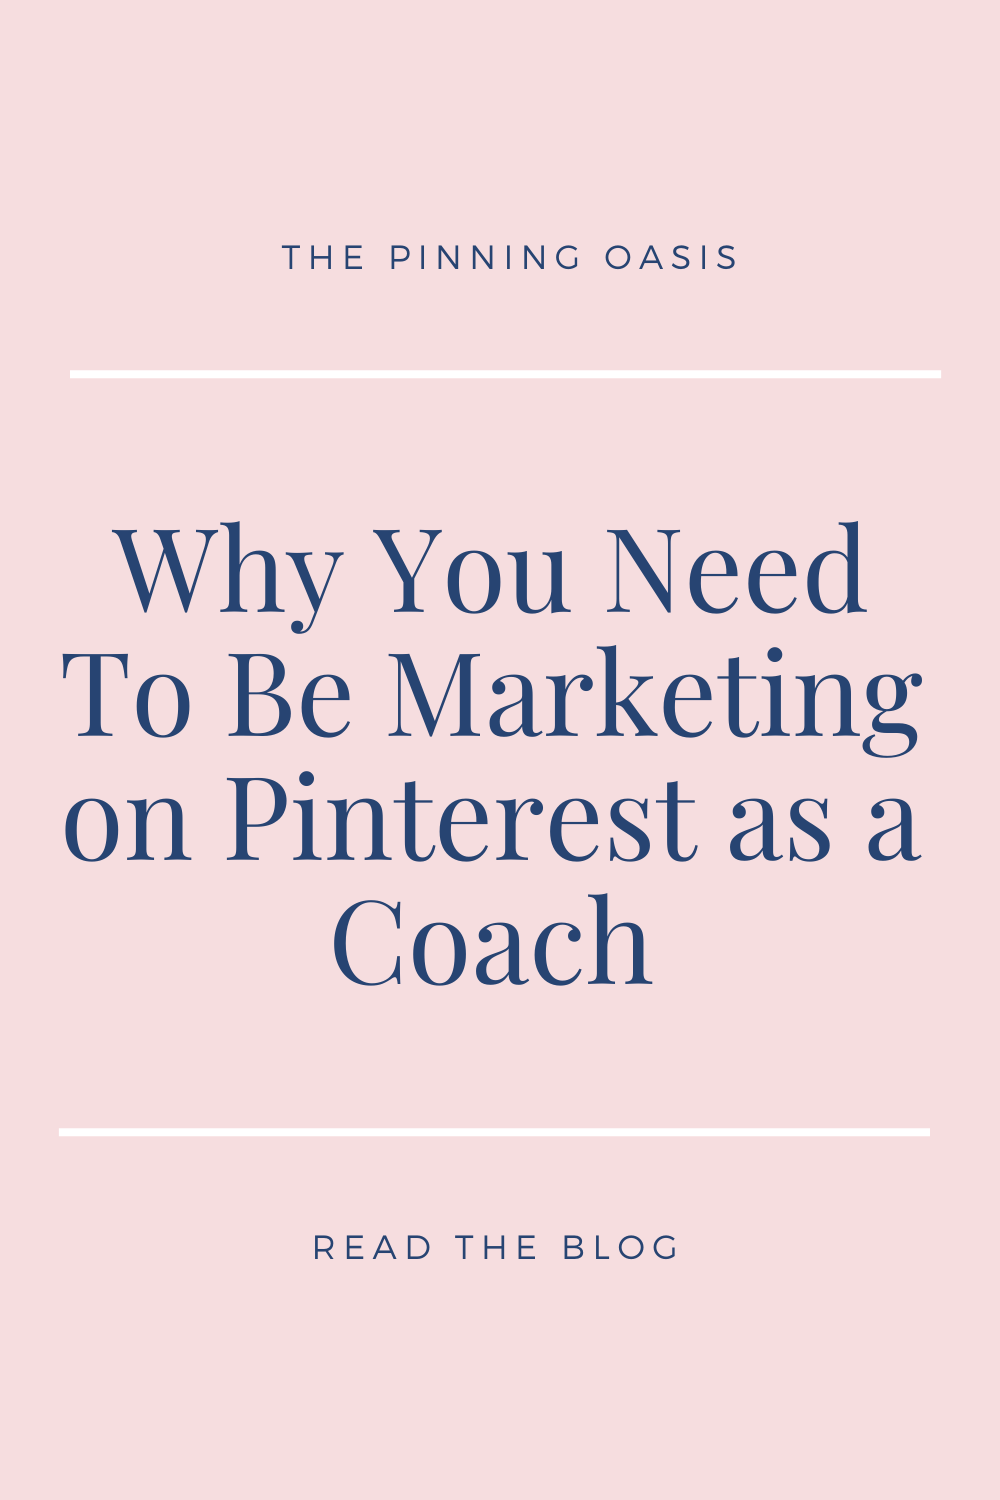 Why You Need to Be Marketing on Pinterest as a Coach – The Pinning Oasis